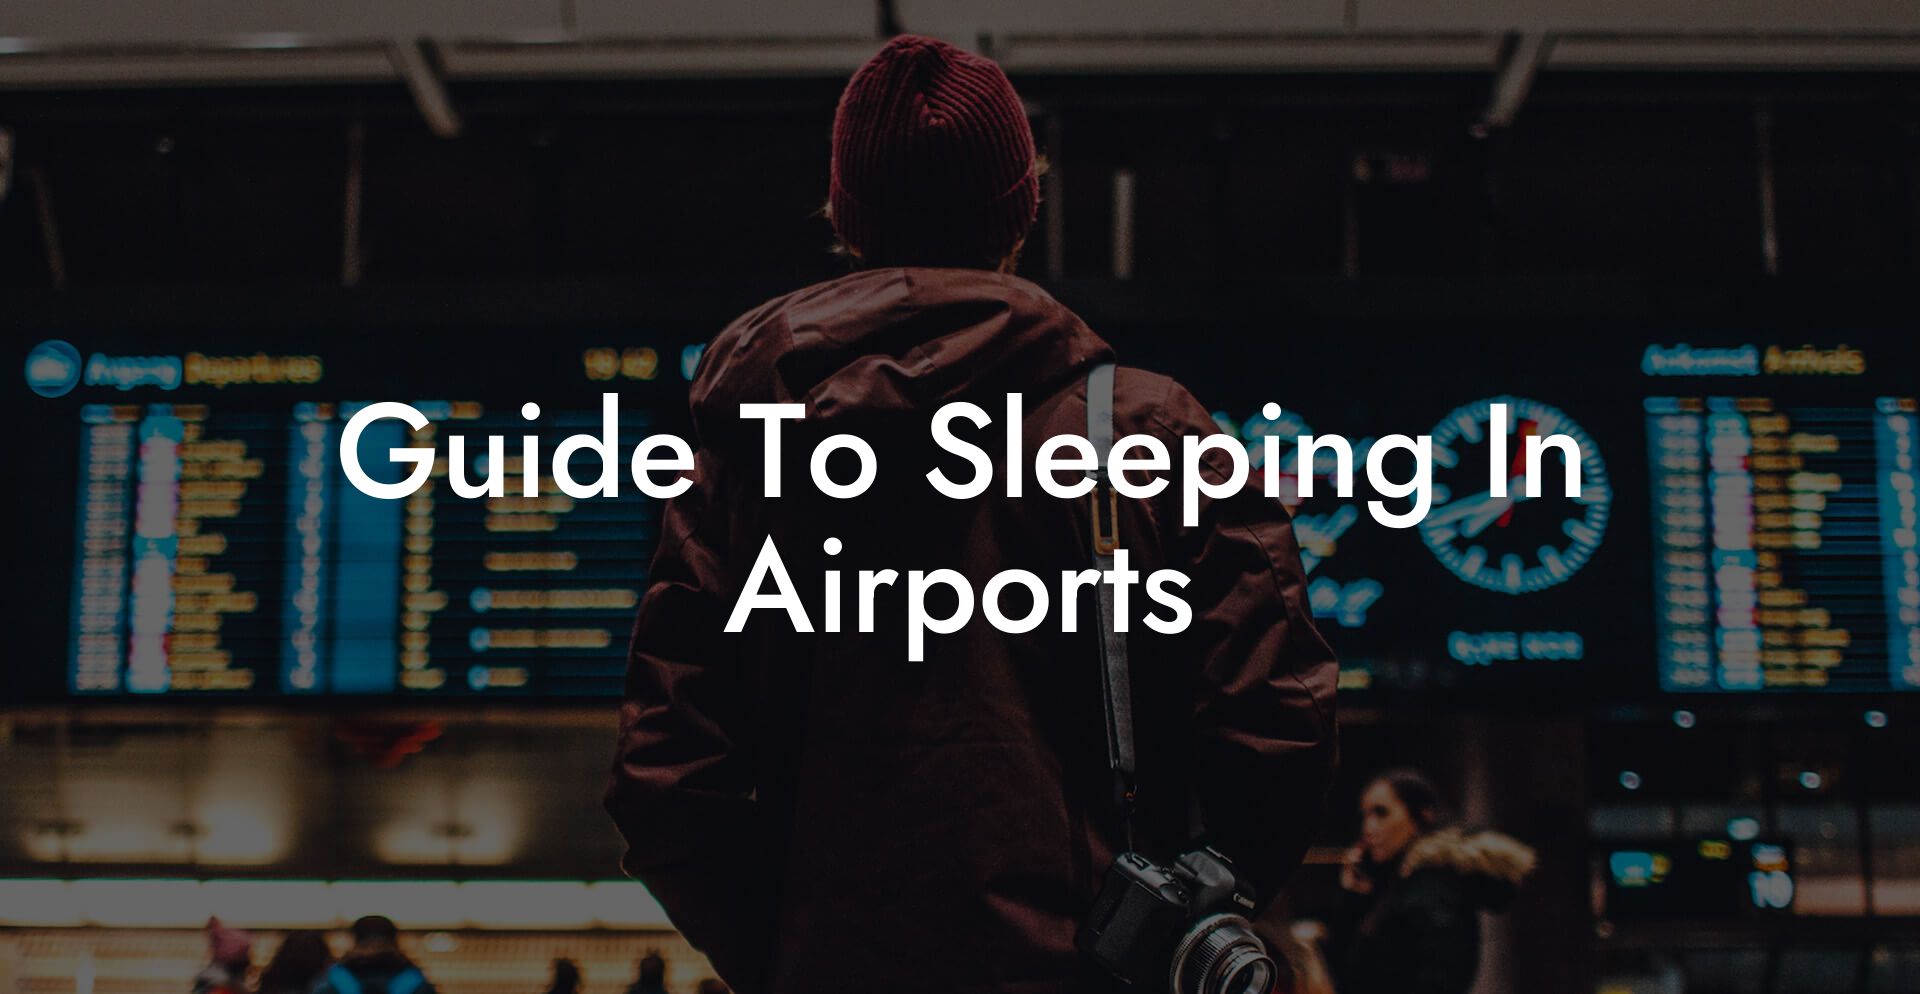 Guide To Sleeping In Airports